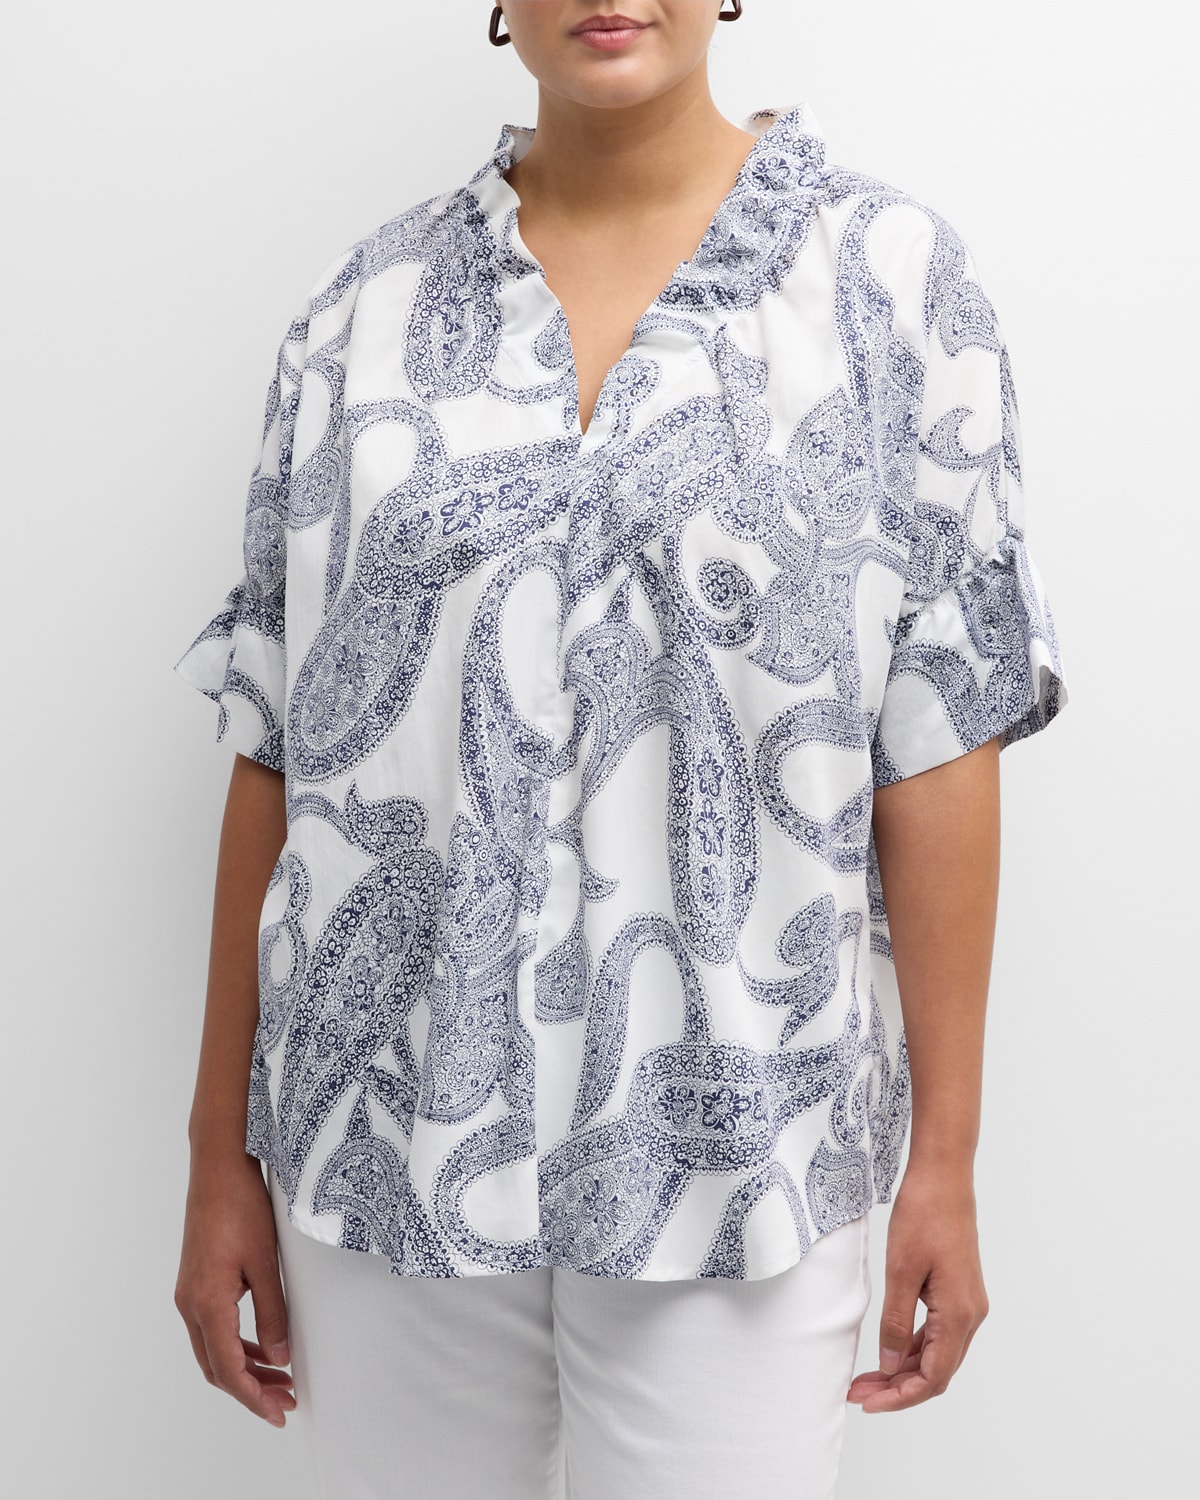 Finley Plus Size Crosby Paisley-print Cotton Top In White/navy